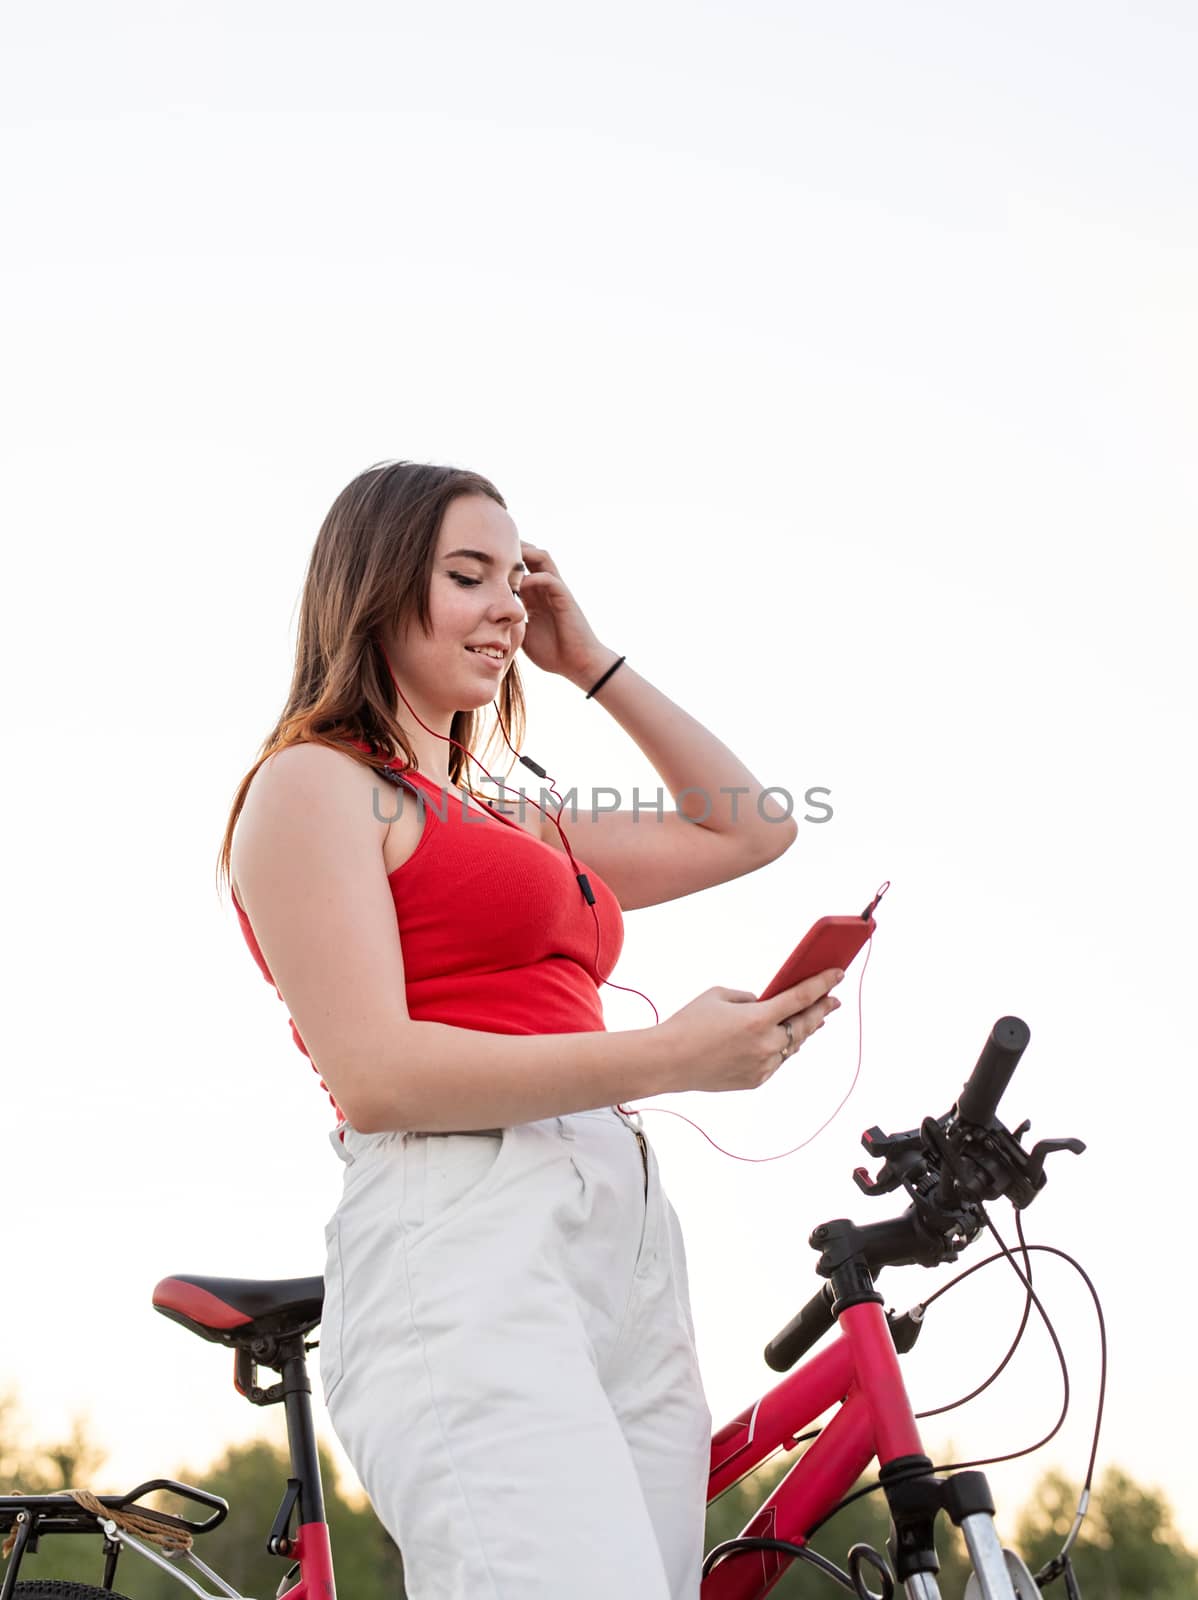 Teenage girl standing next to her bike listening to the music in headphones in the park at sunset by Desperada